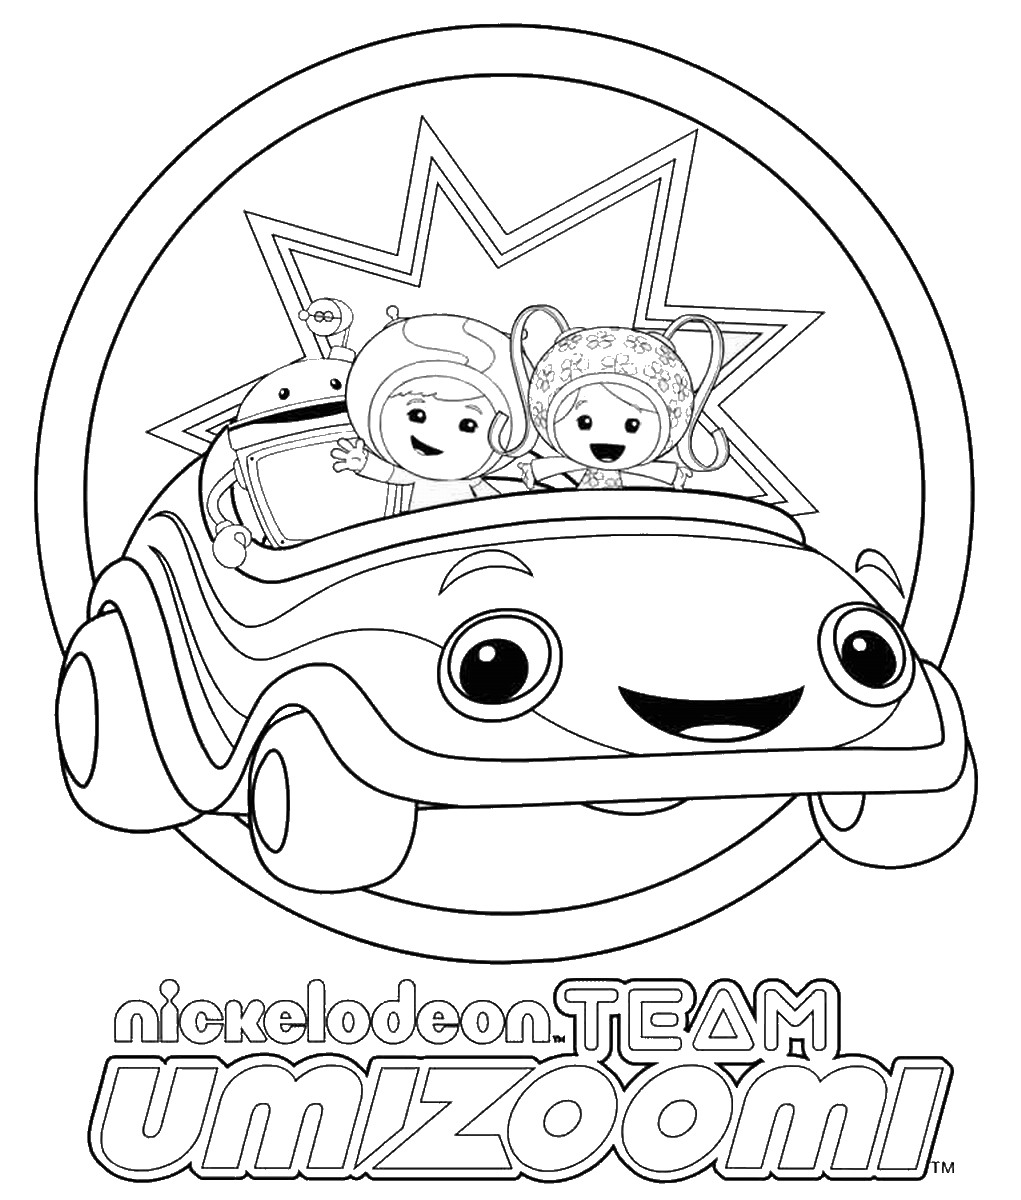 Team Omizoomi Coloring Pages